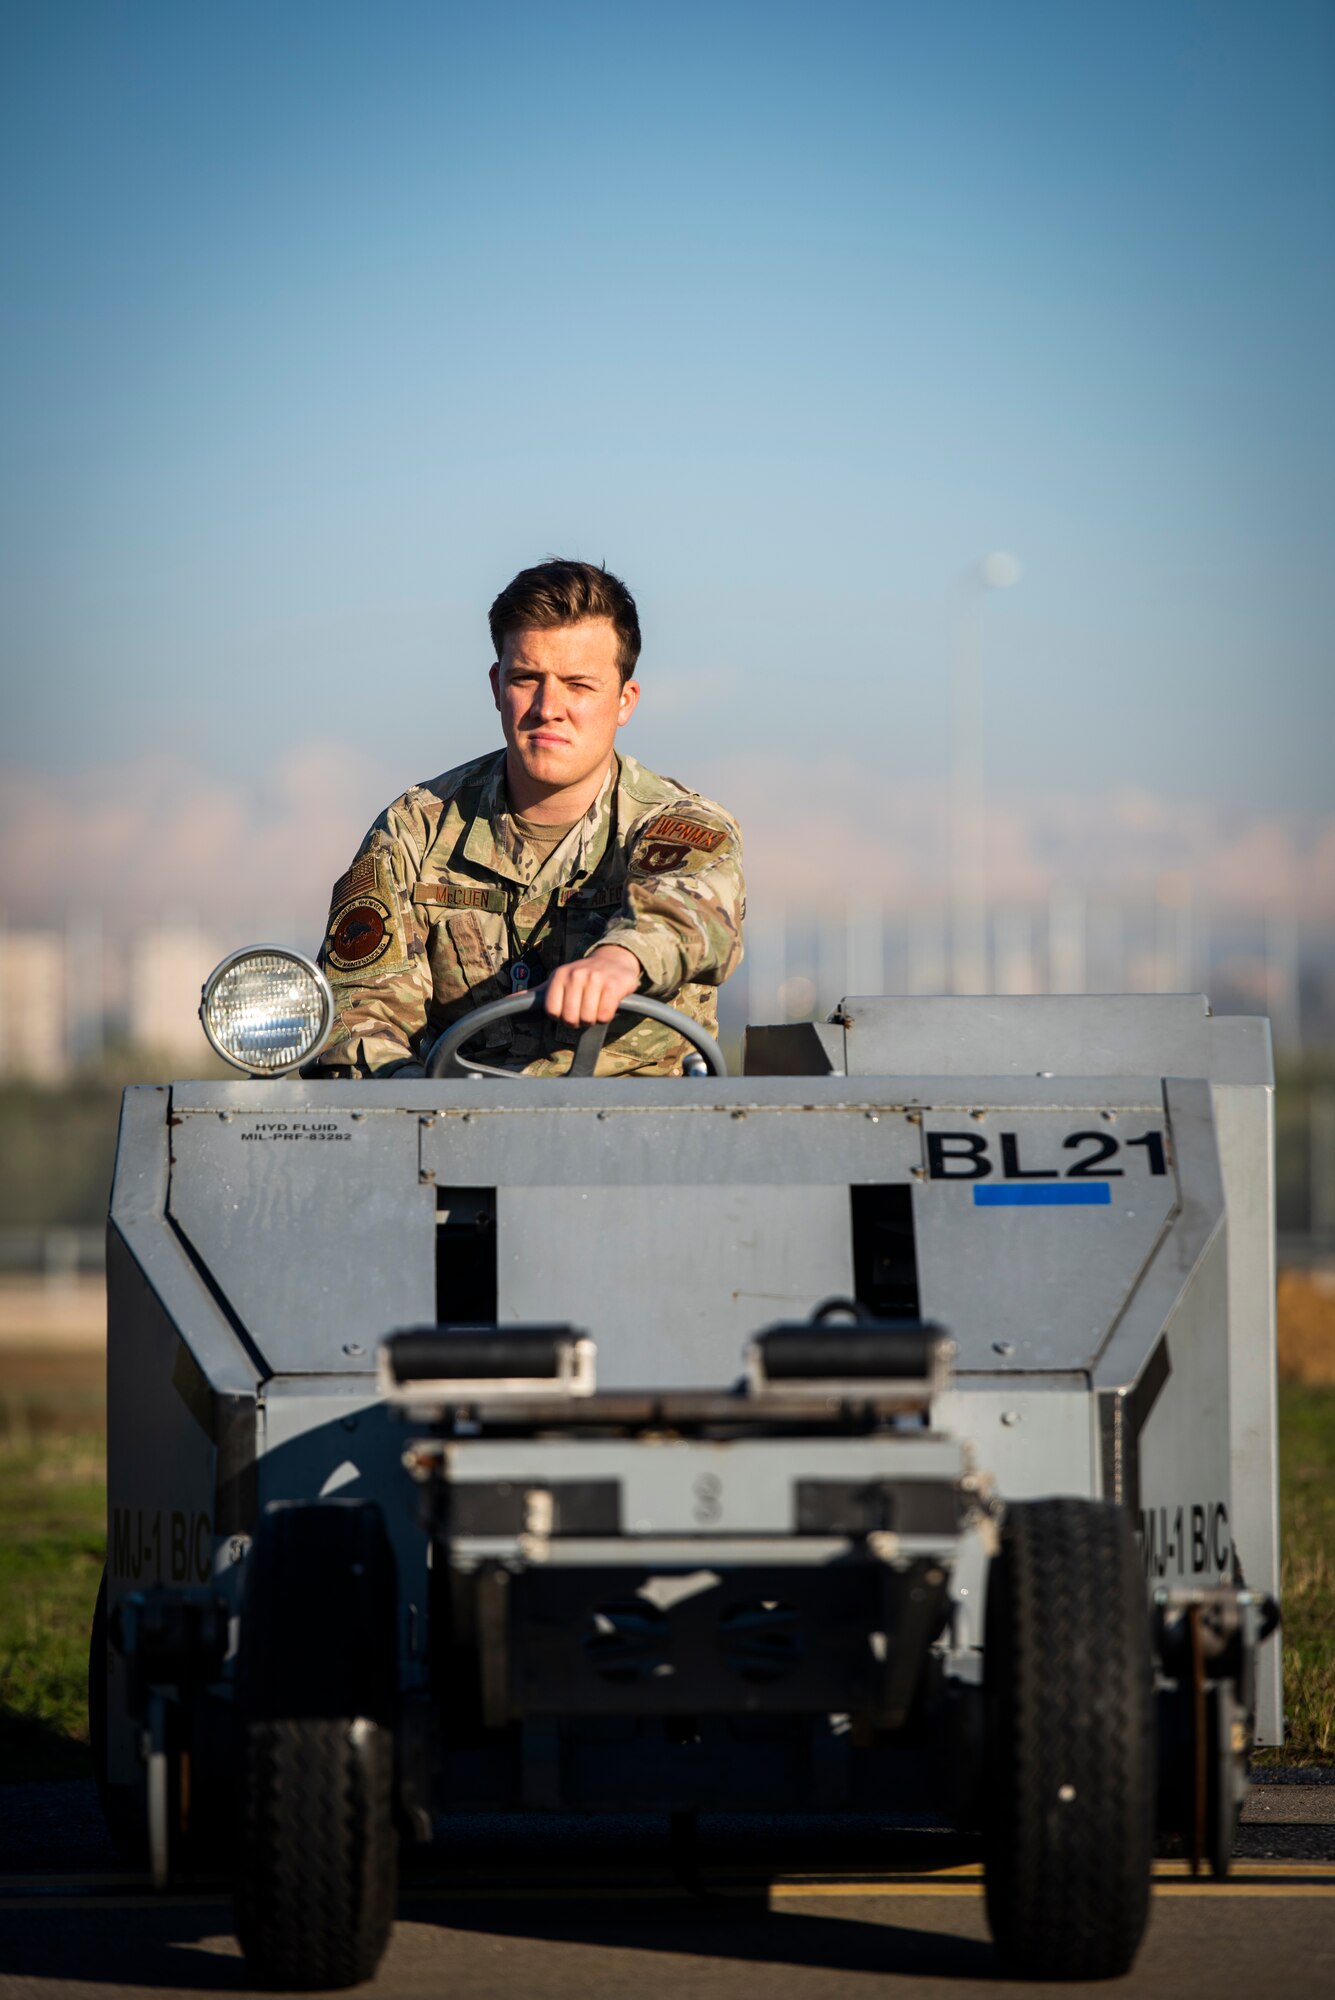 Senior Airman Weston McCuen, a special weapons technician assigned to the 39th Maintenance Squadron, operates an MJ-1 standard lift truck at Incirlik Air Base, Turkey, Dec. 21, 2021.